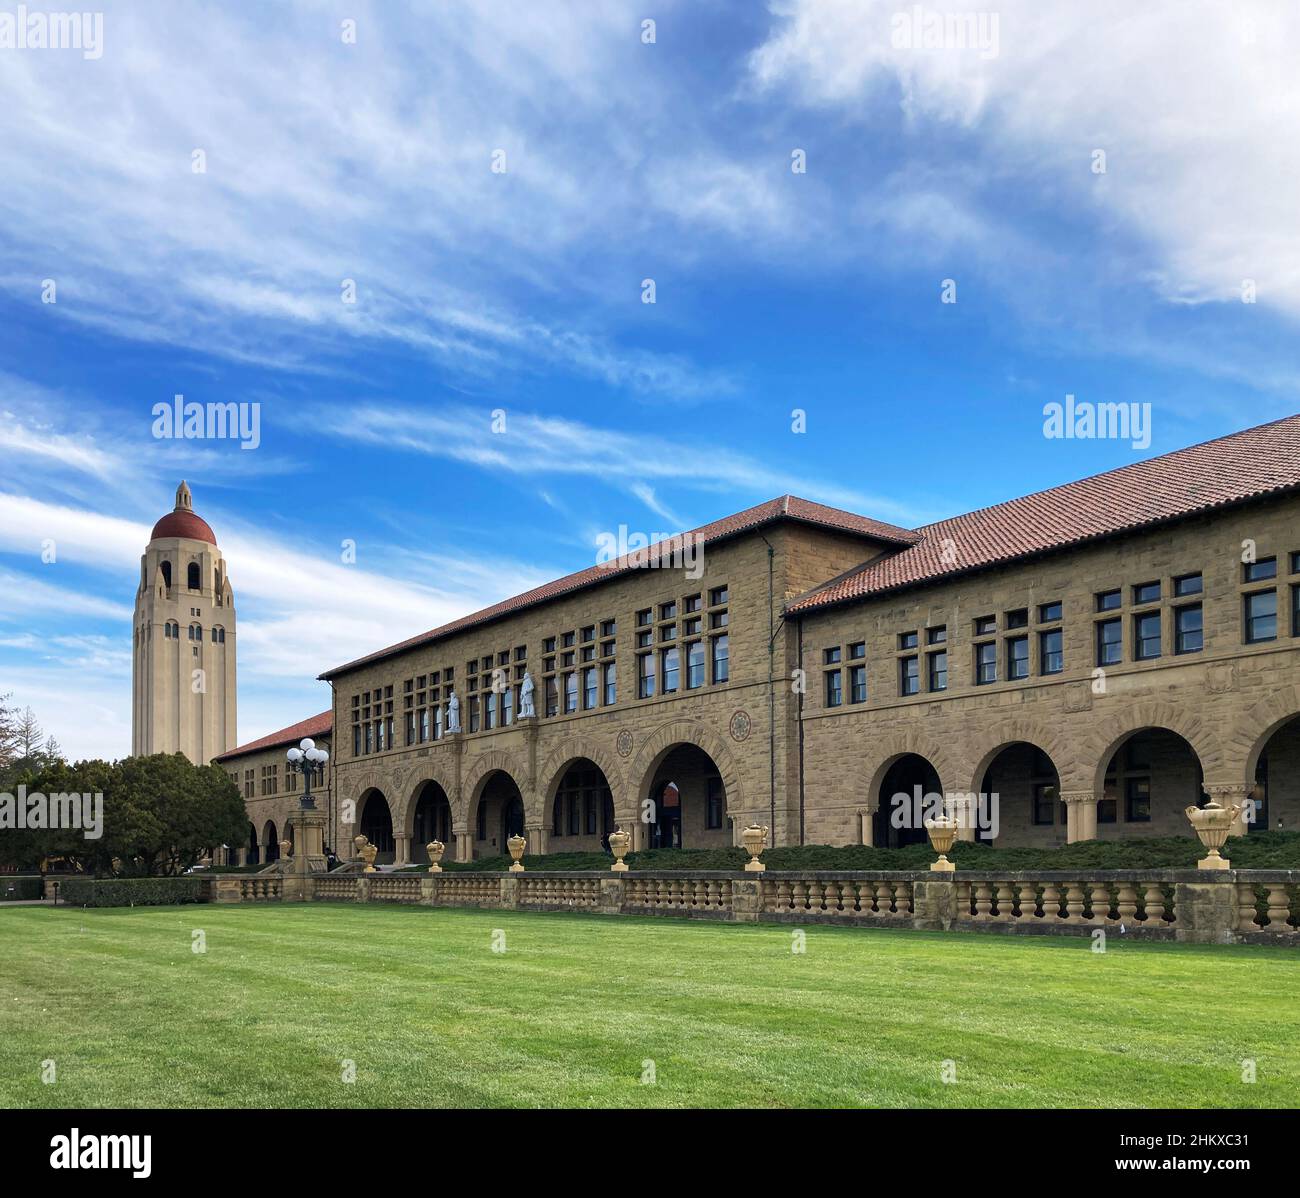 Hoover tower and Lane History Corner building on beautiful campus of Stanford University under blue sky - Palo Alto, California, USA - 2022 Stock Photo